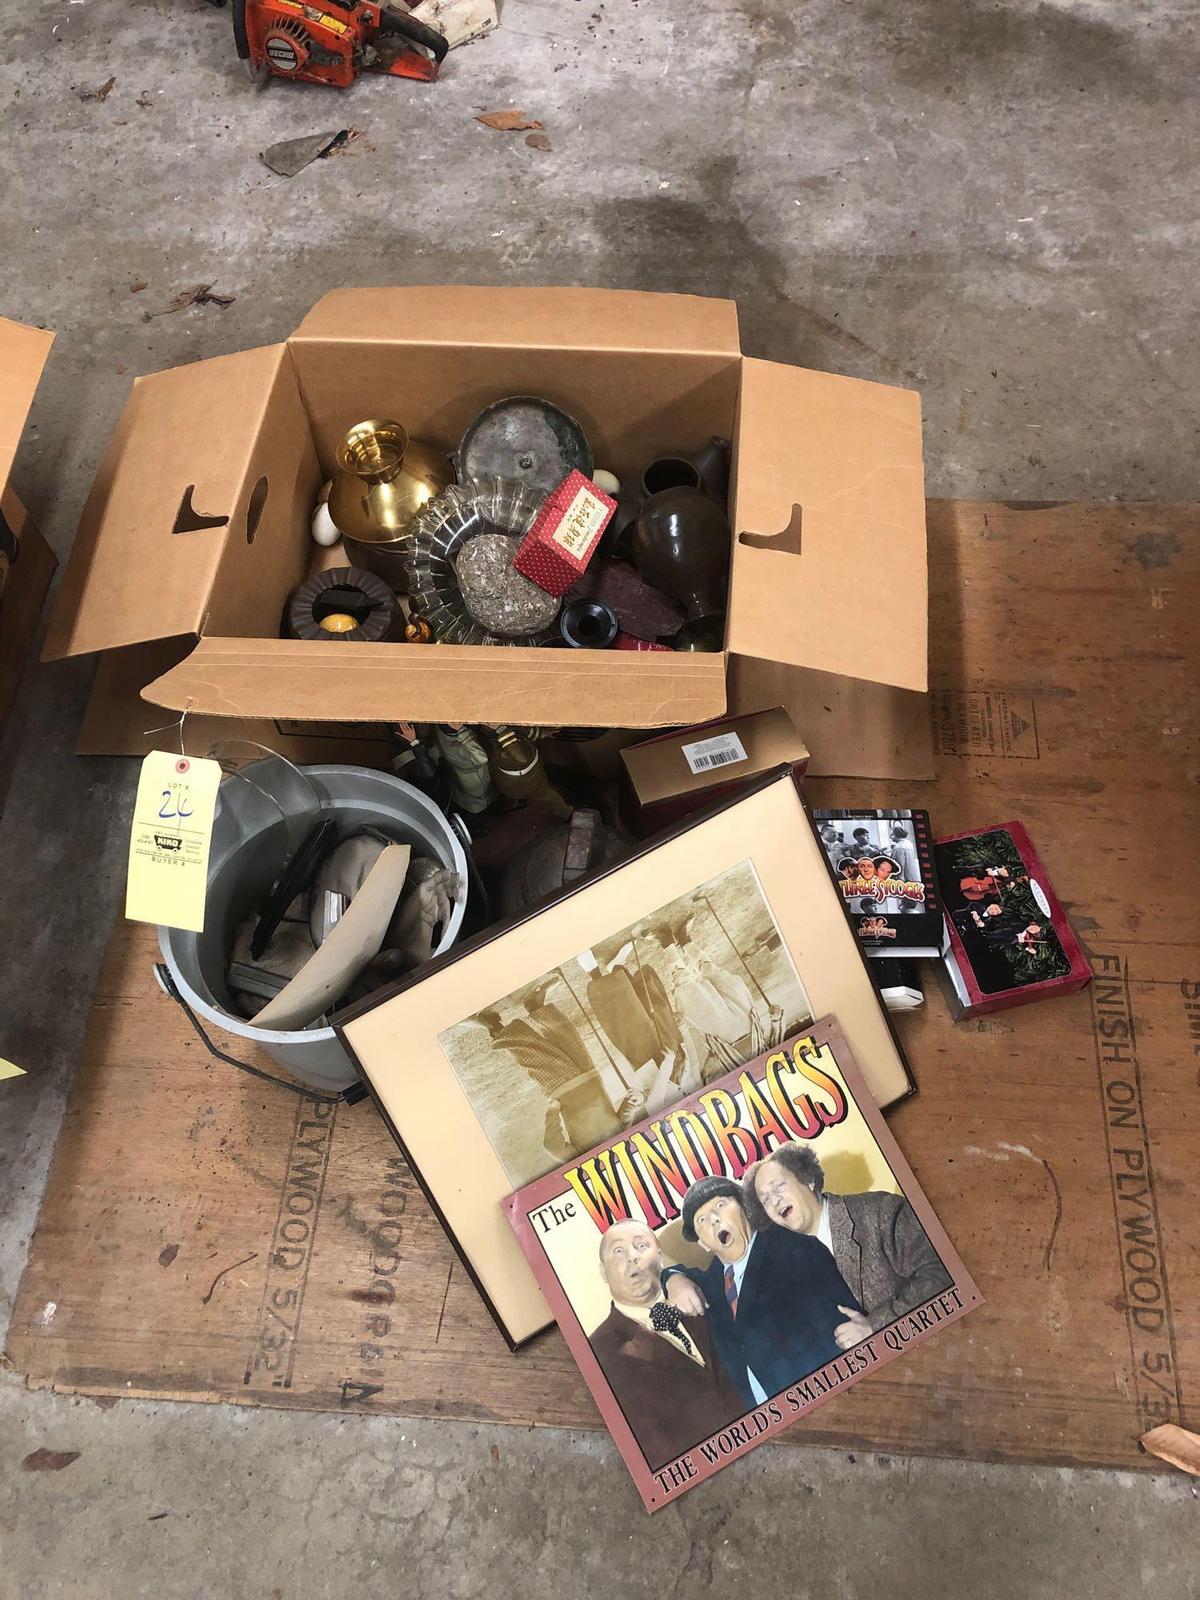 Antiques and 3 stooges collectibles